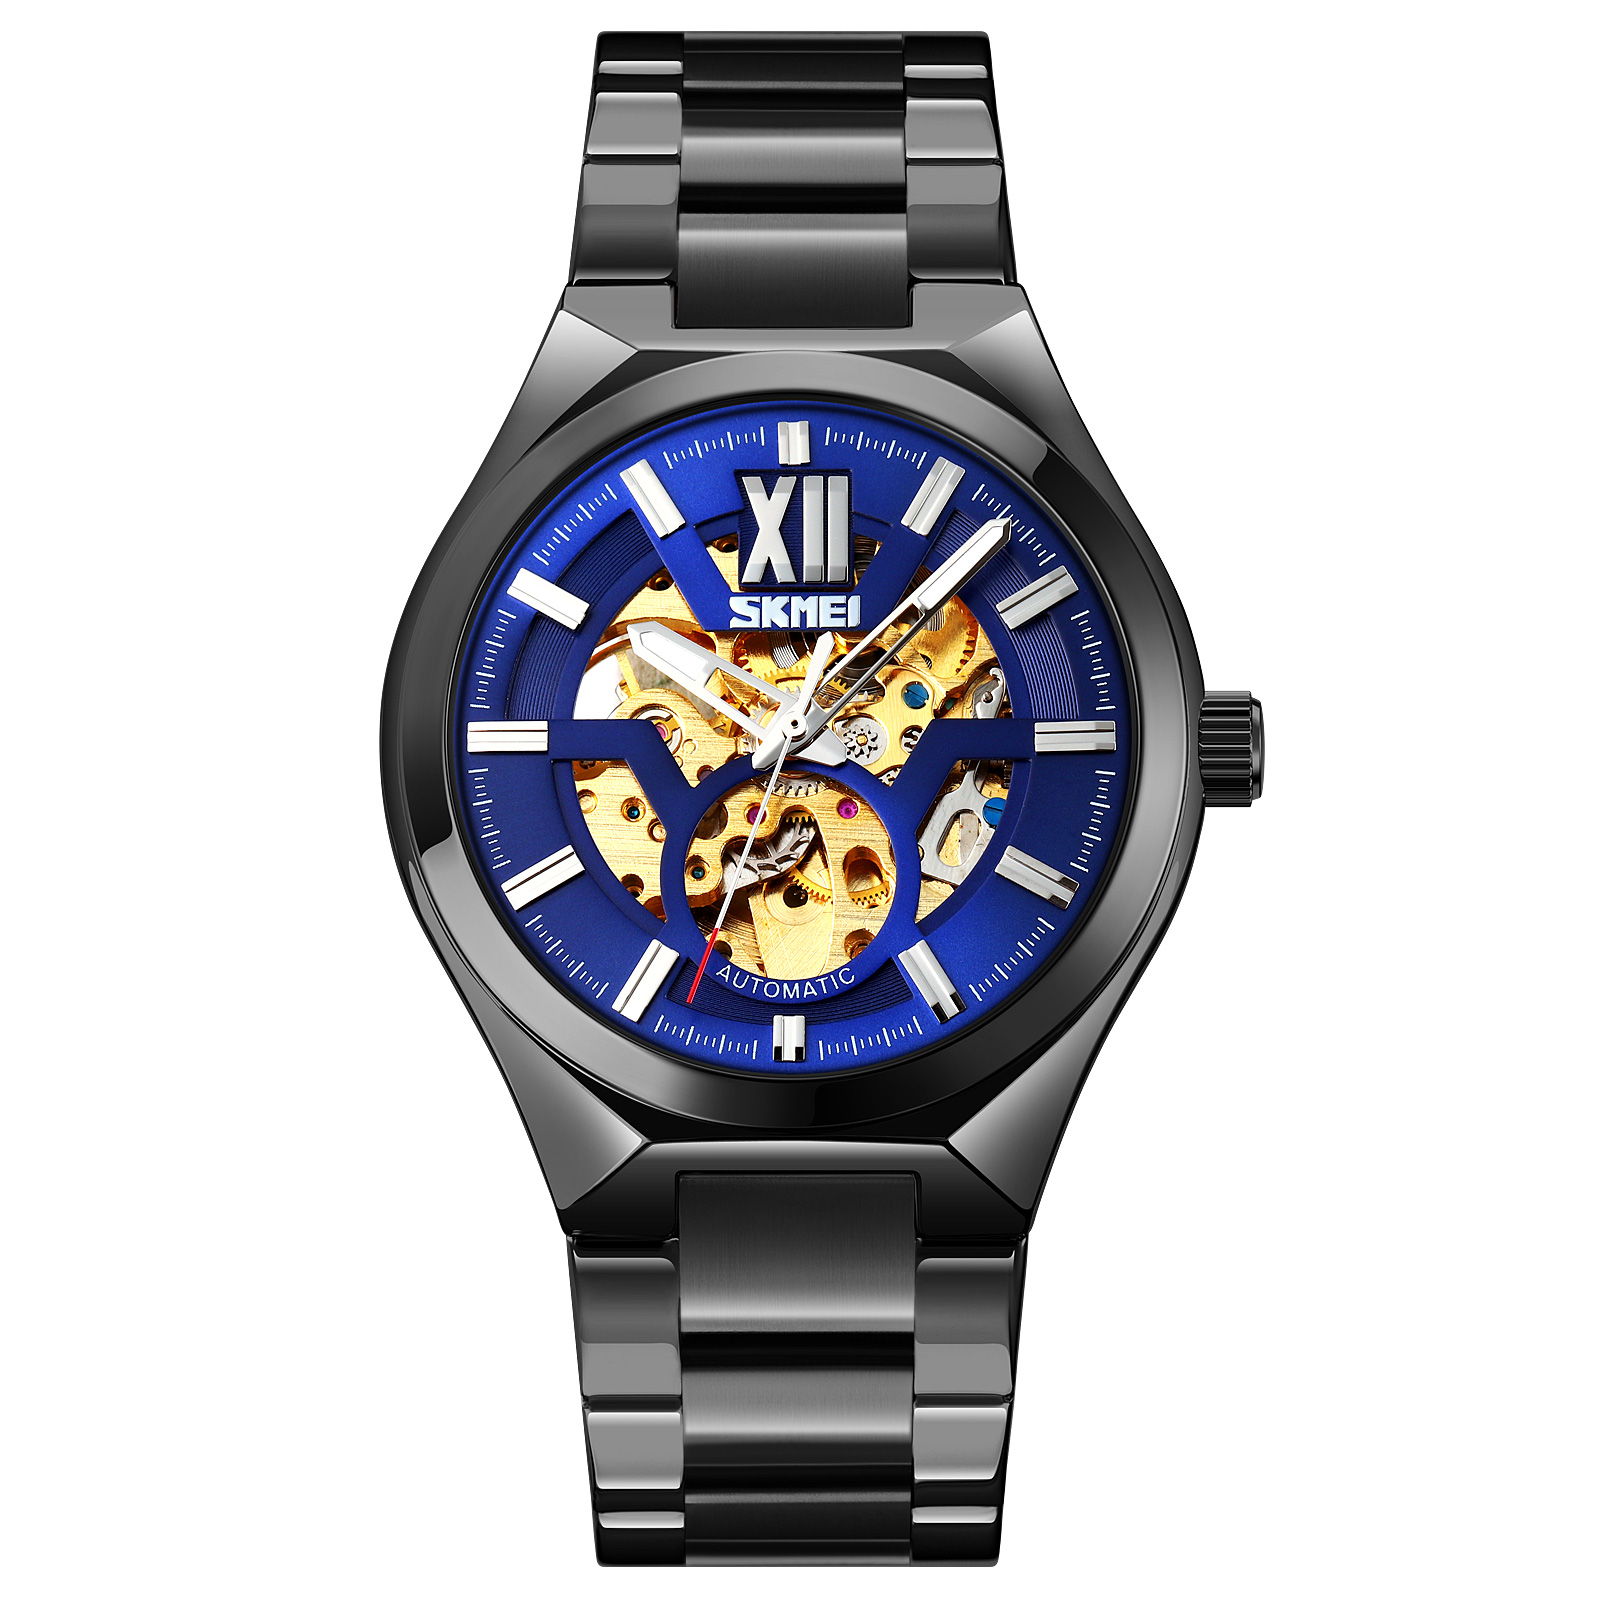 SKMEI 9246 Men Watch Automatic Mechanical Hollow Dial Luminous Nylon Strap  Date Display - Camuoflage Blue